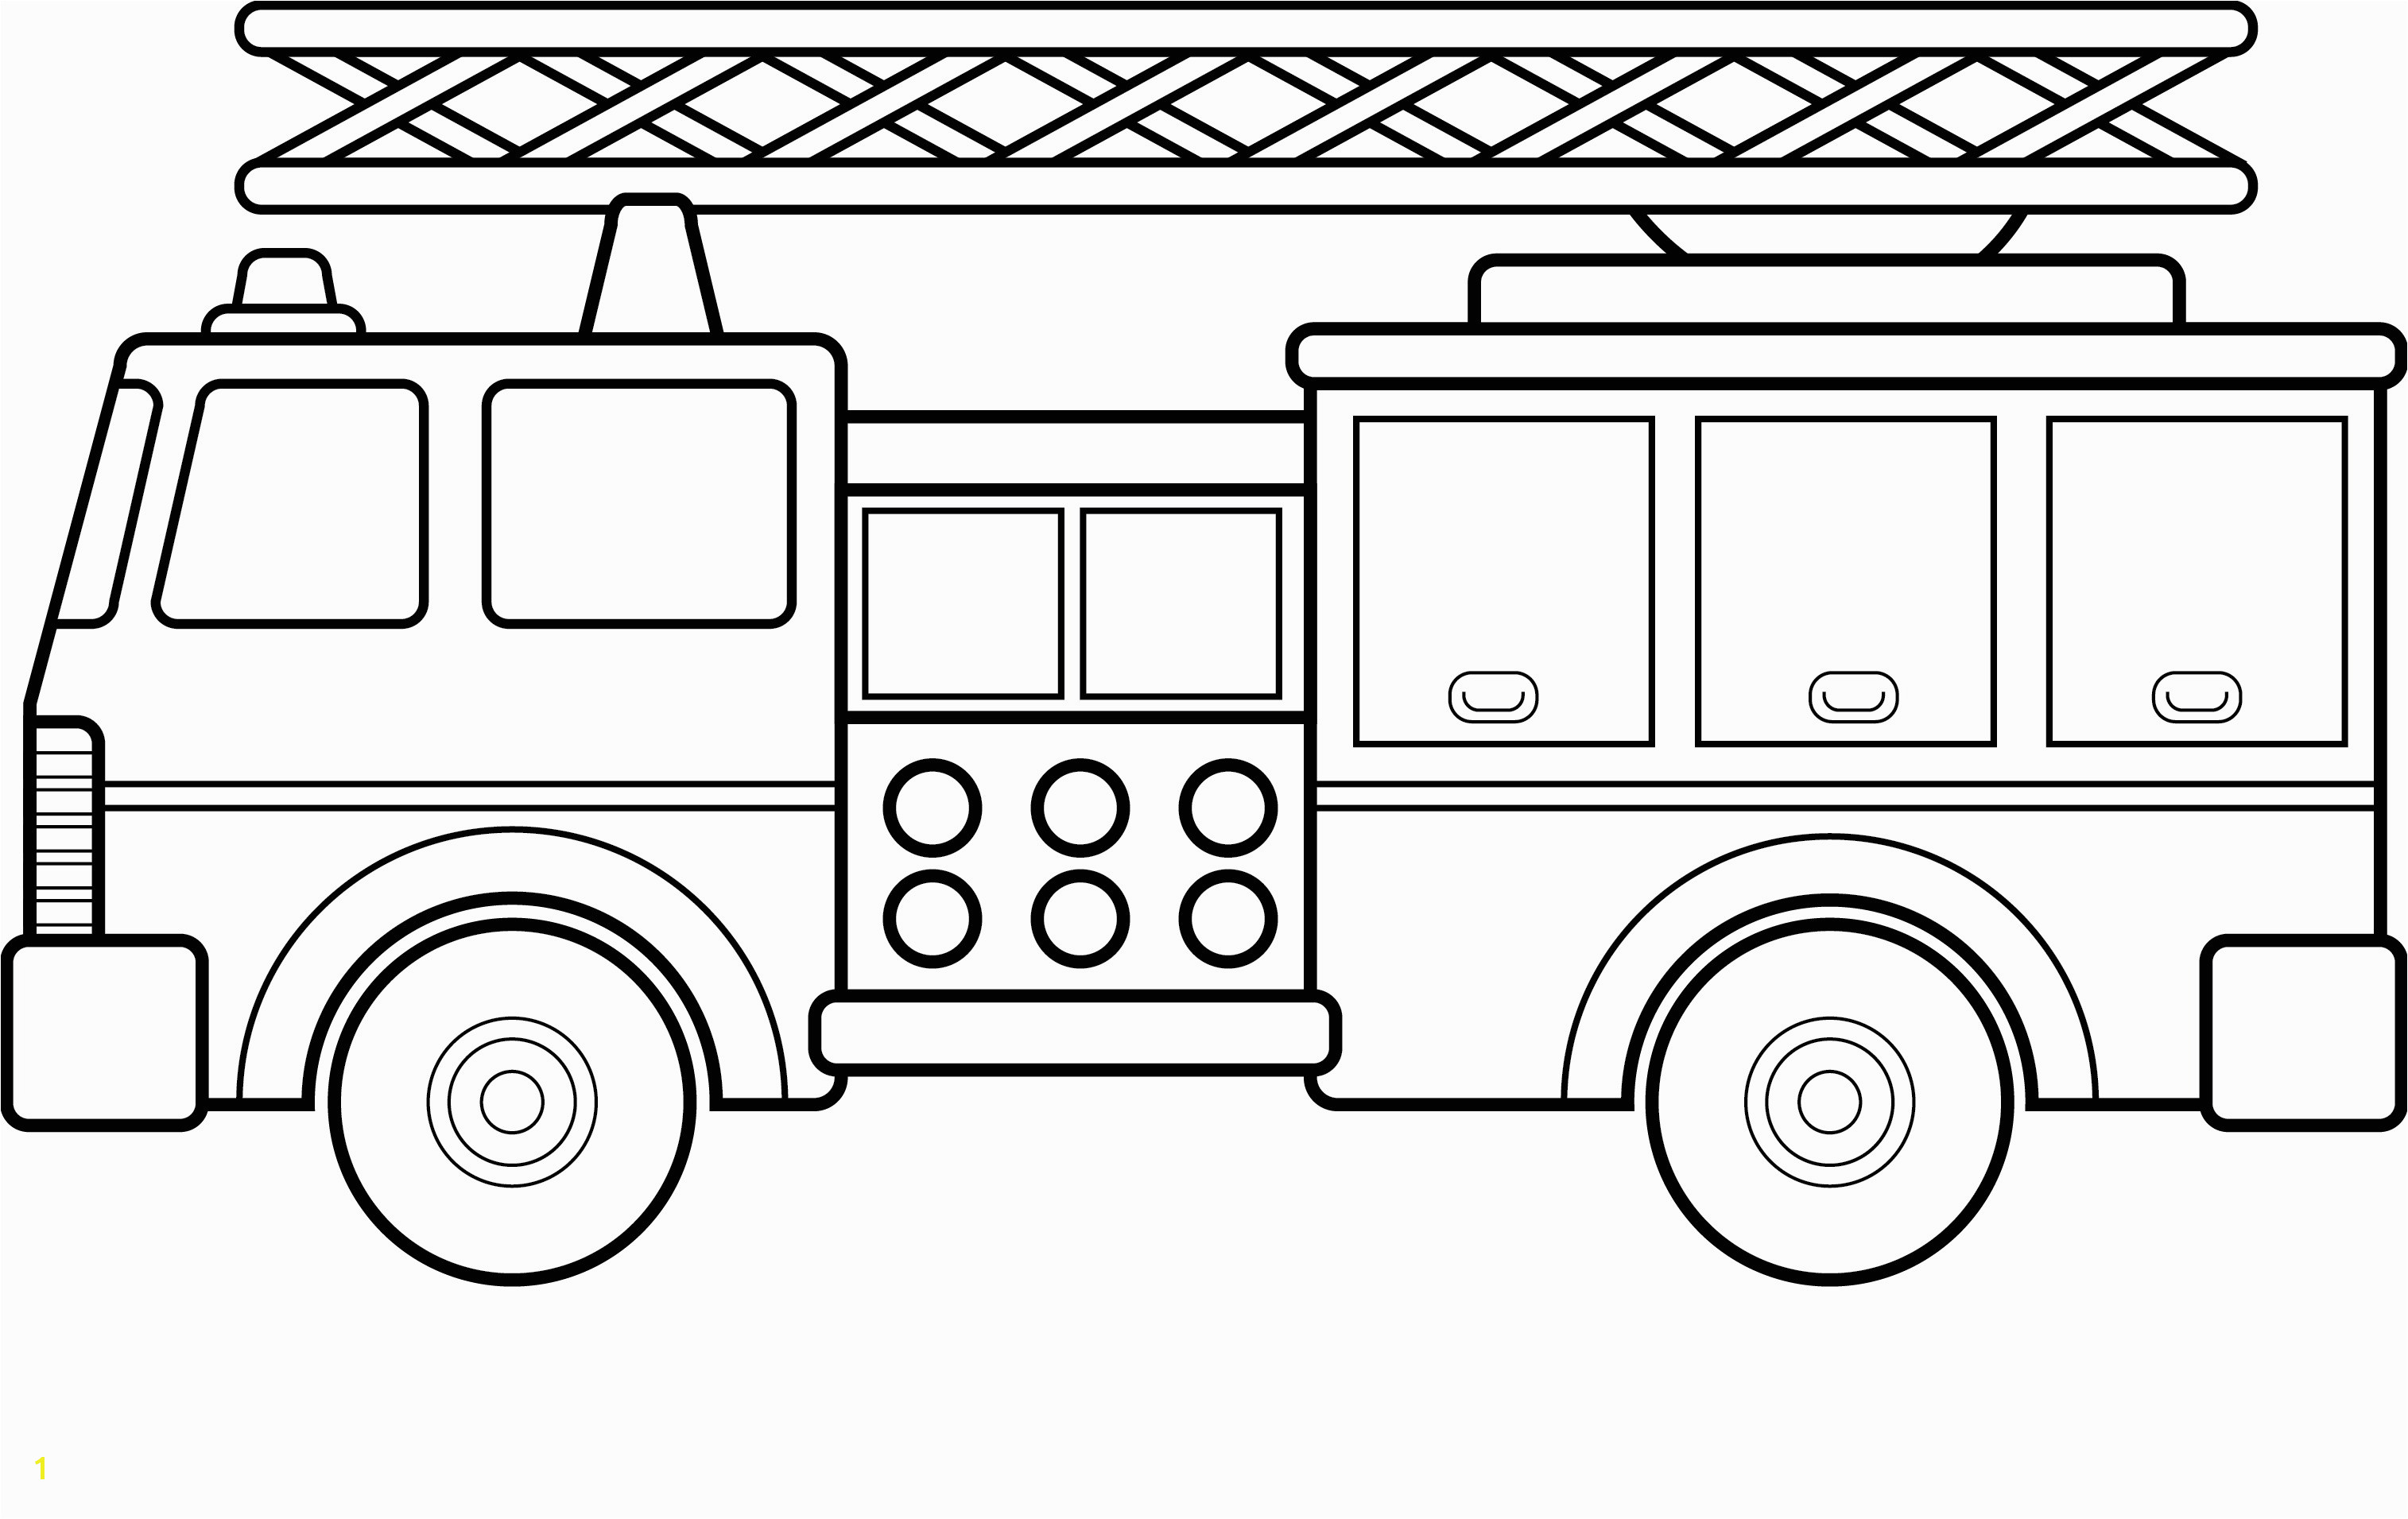 Free Printable Fire Truck Coloring Page Fire Truck Coloring Pages Sample thephotosync